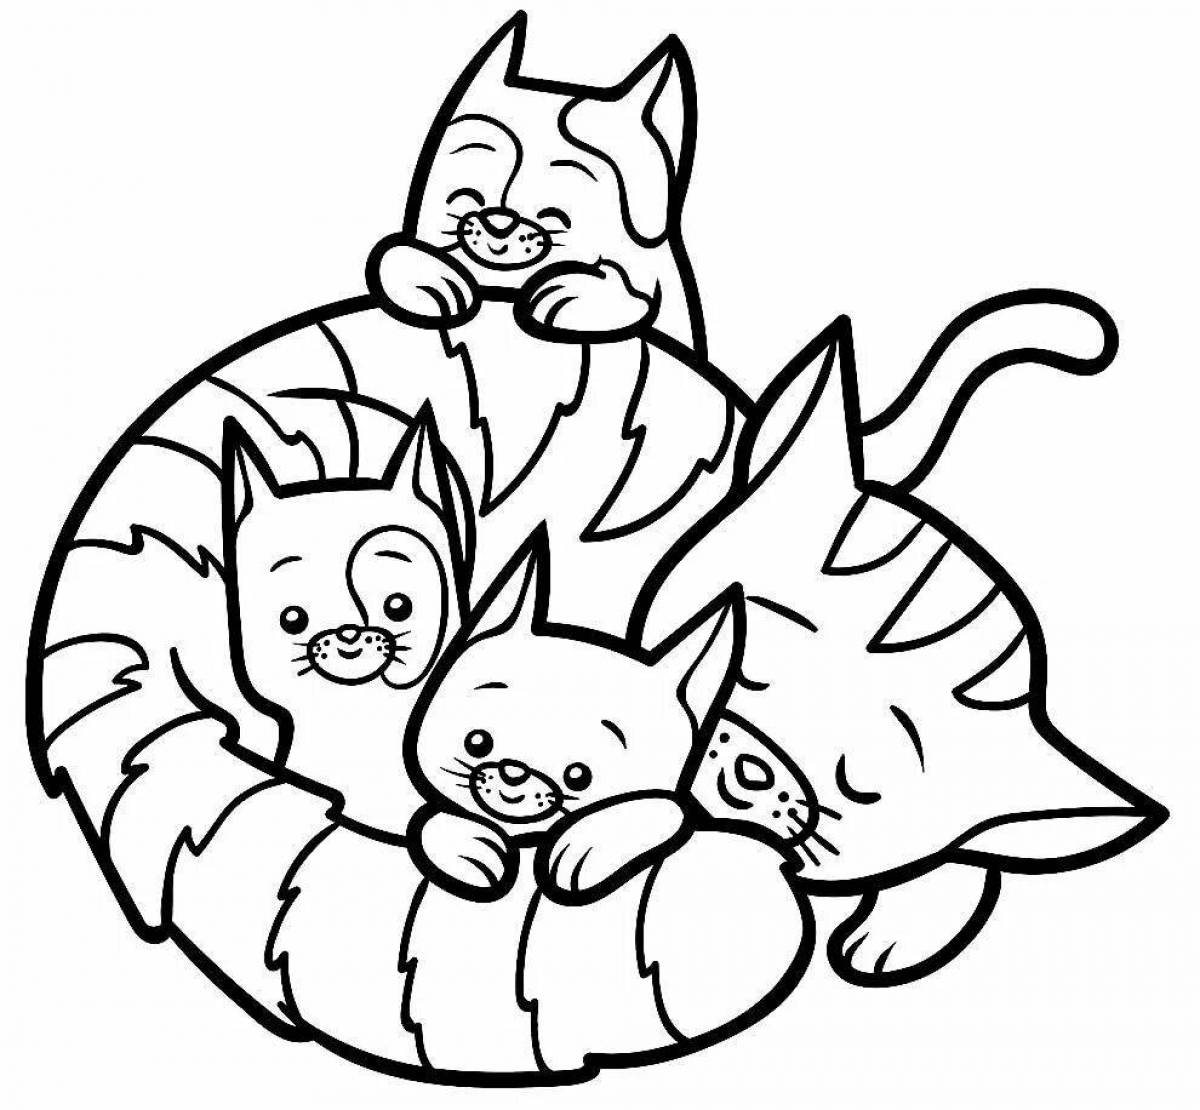 Coloring book bright cat family